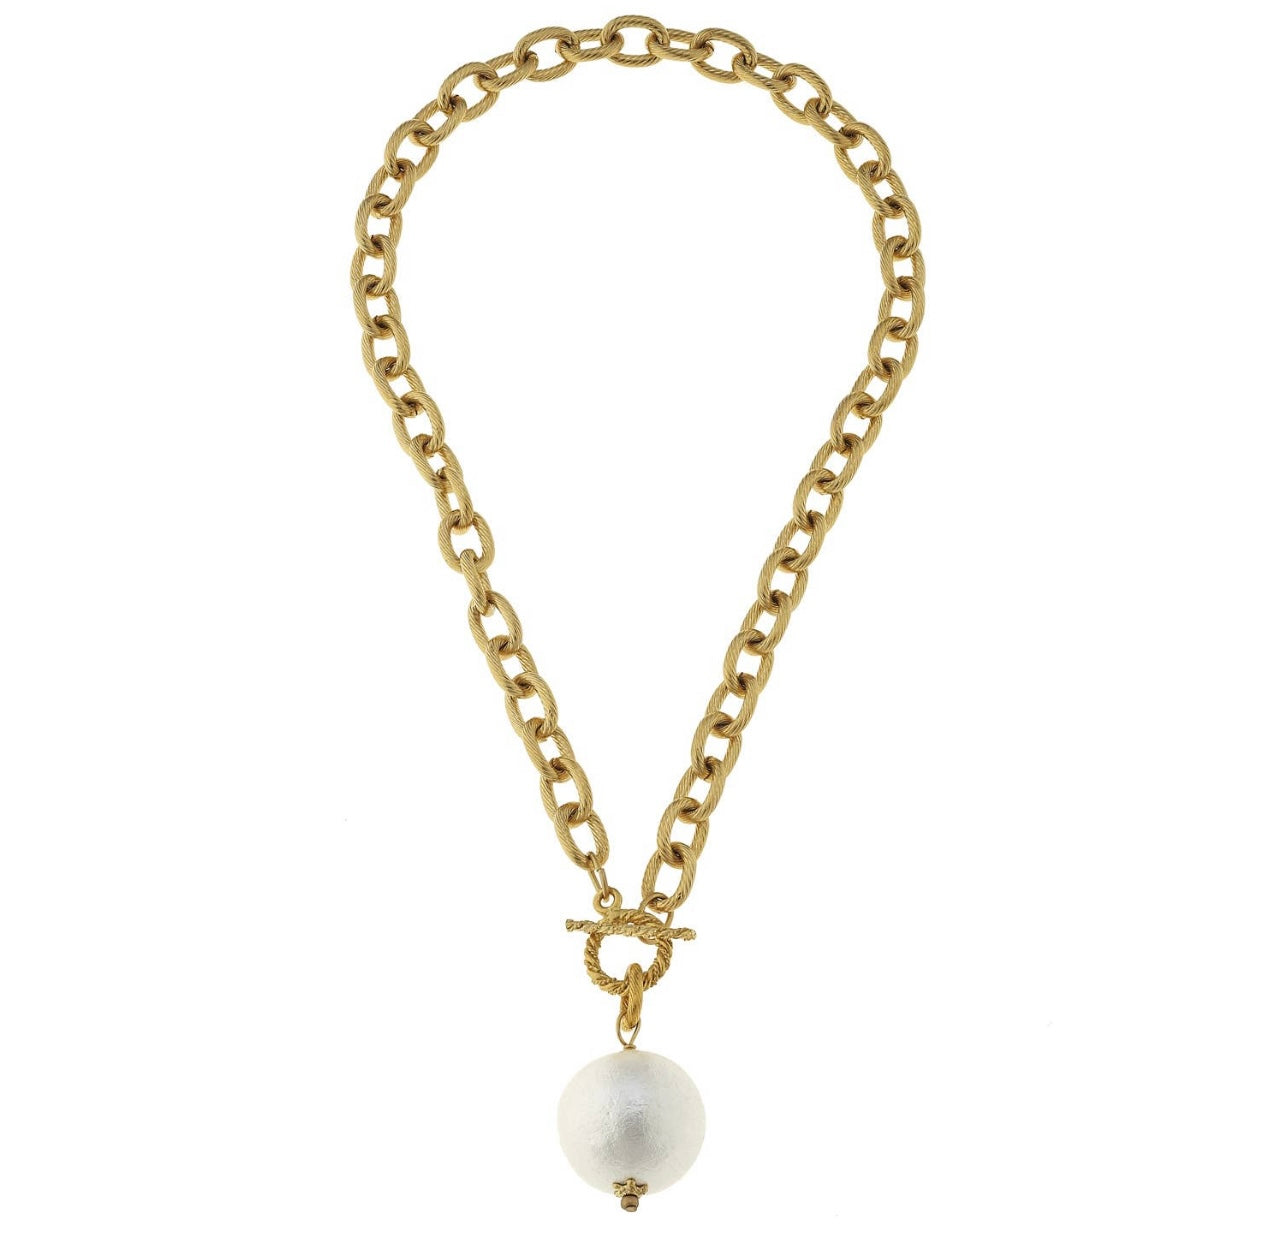 Cotton Pearl Necklace By Susan Shaw